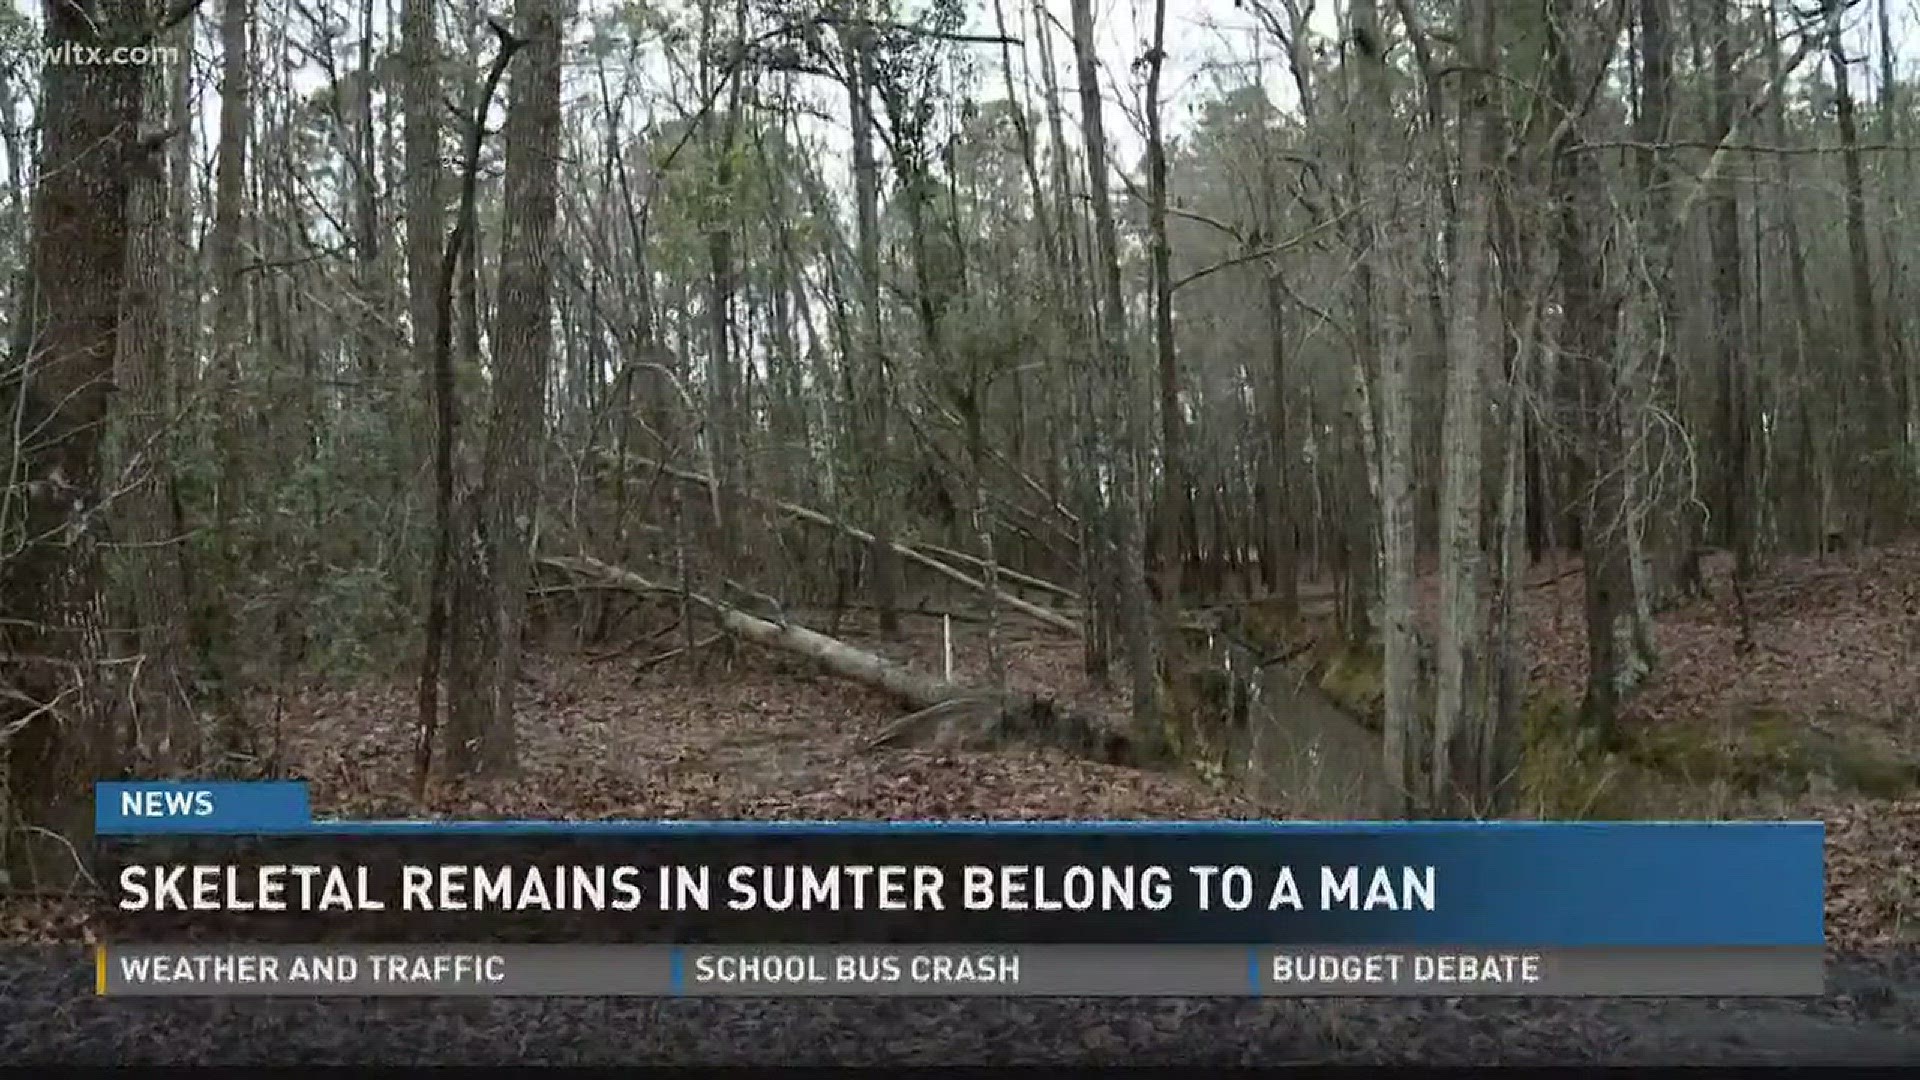 A preliminary autopsy shows the skeletal remains found by kids in a wooded area this weekend belong to a middle-aged white male.